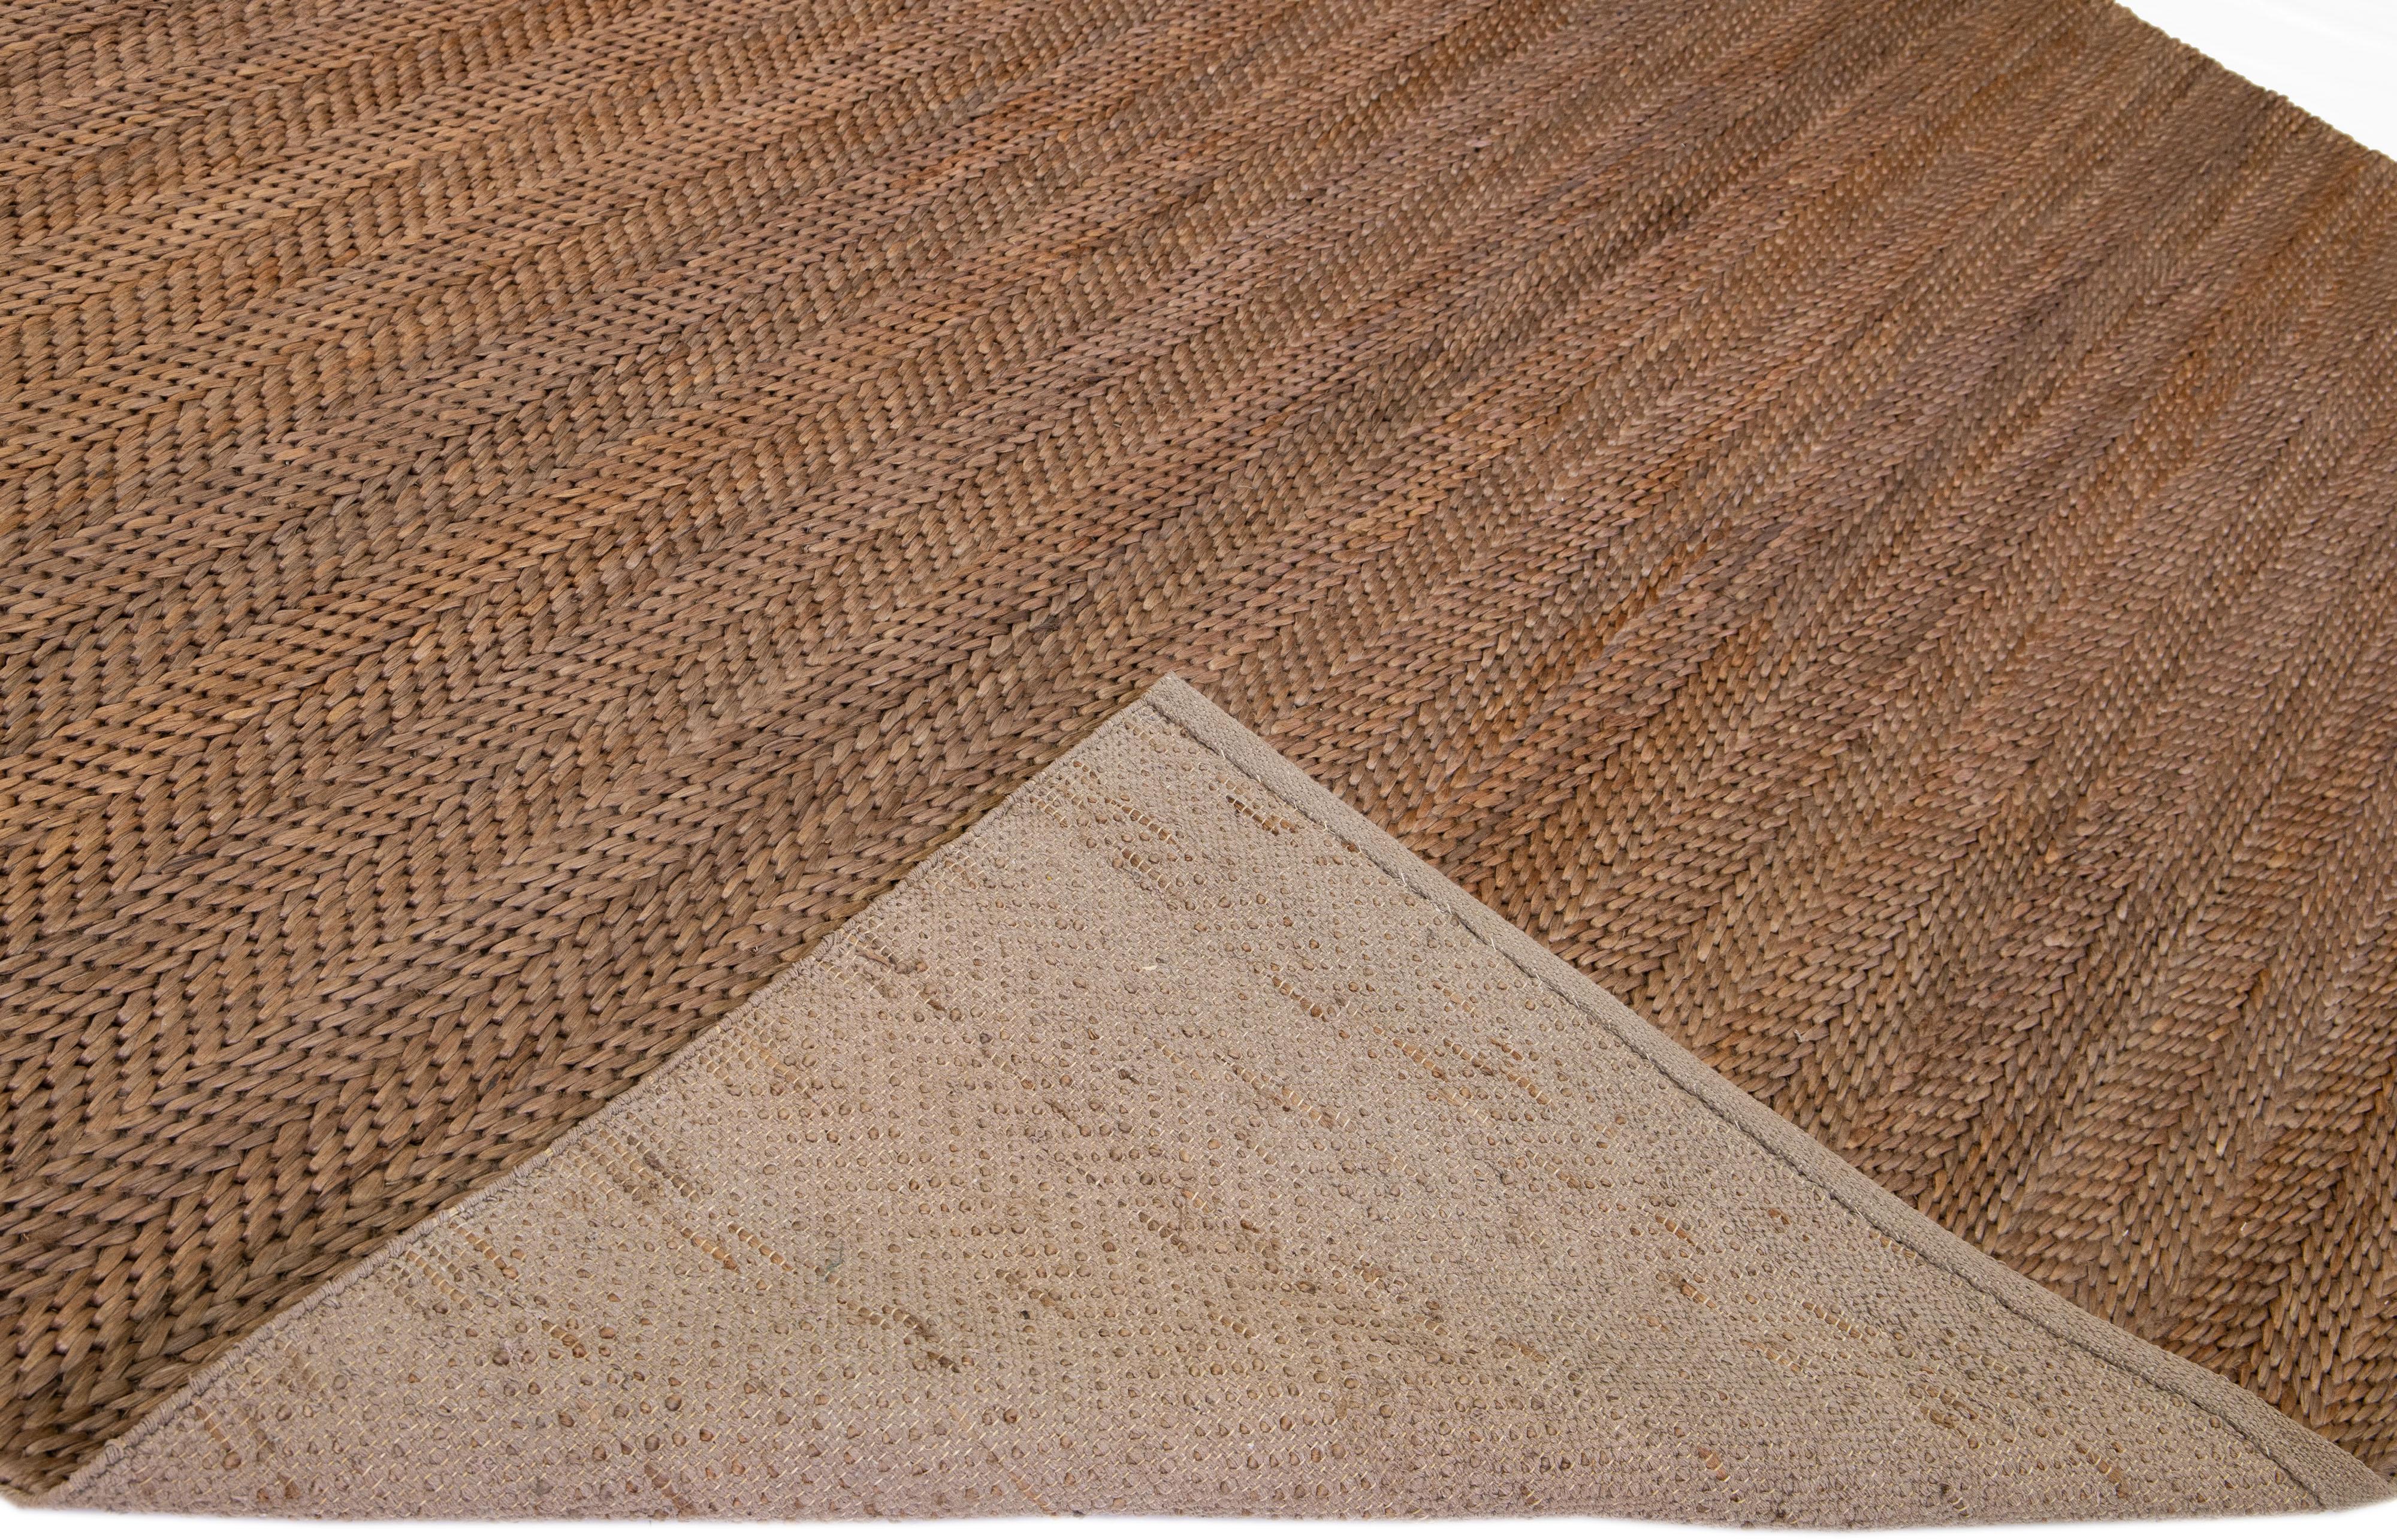 Beautiful natural hand-woven 70% jute and 30% cotton rug with the brown braided field. This Modern rug is perfect for farmhouse, coastal, rustic, bohemian, or contemporary styles of décor. It has a simple solid design that creates subtle shifts of